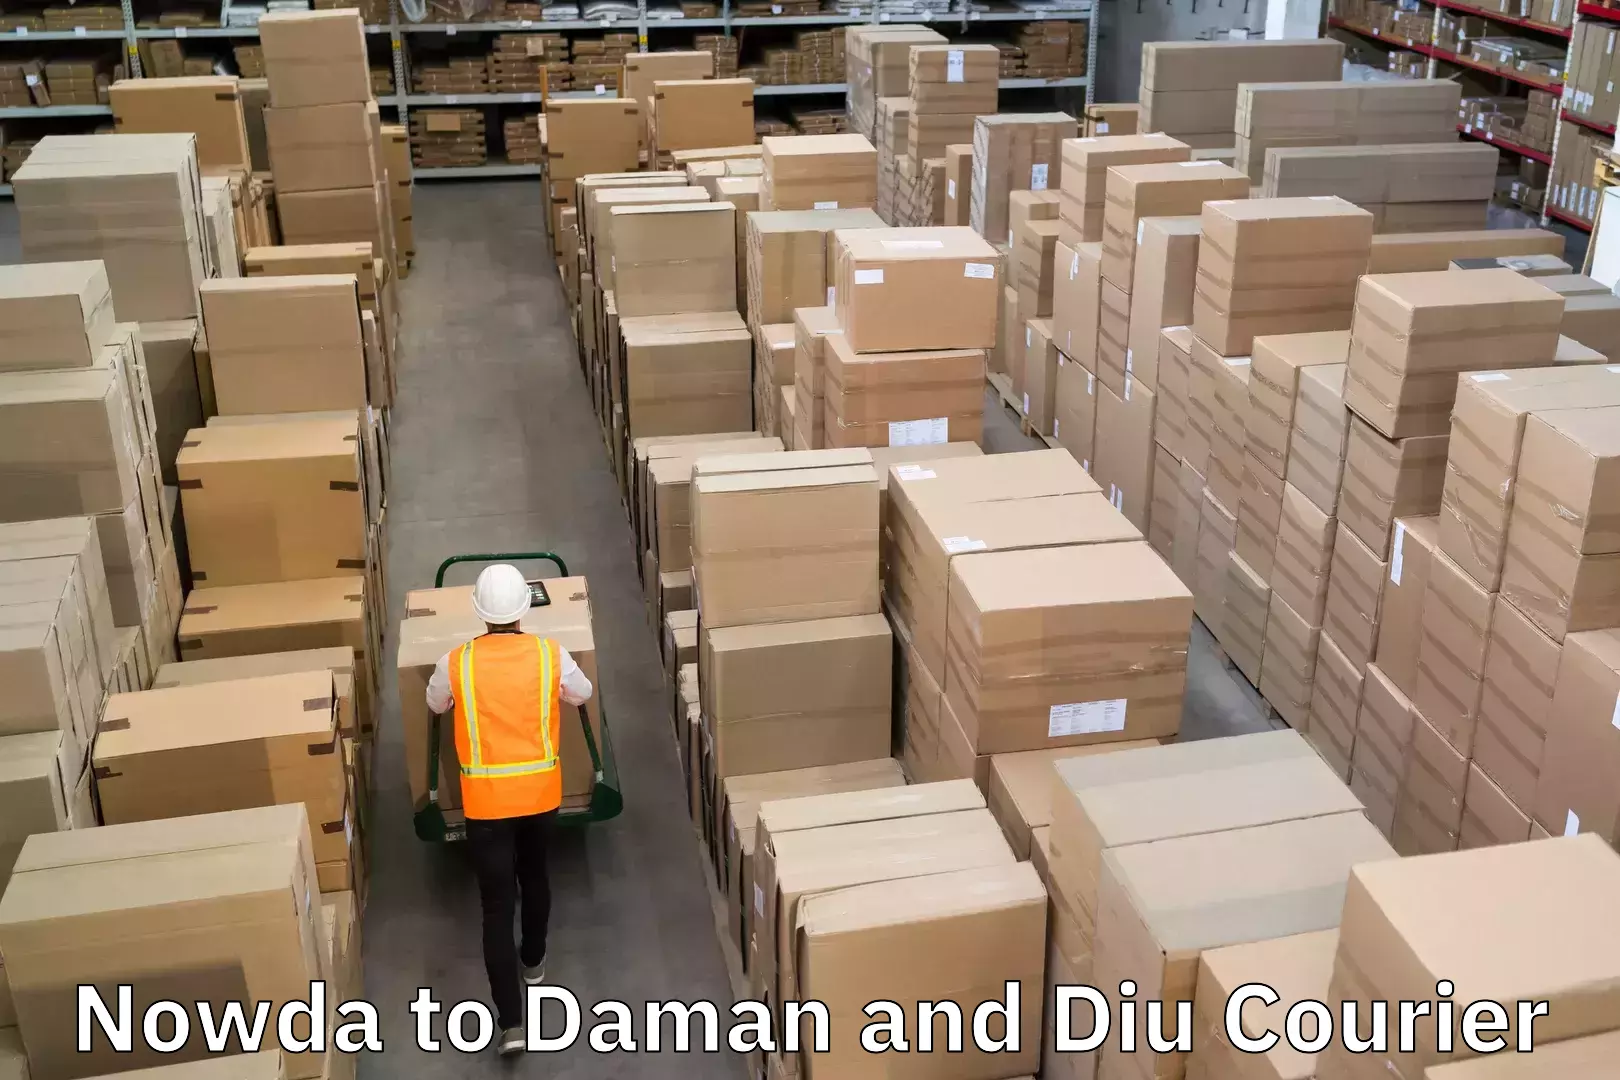 Courier service partnerships Nowda to Daman and Diu